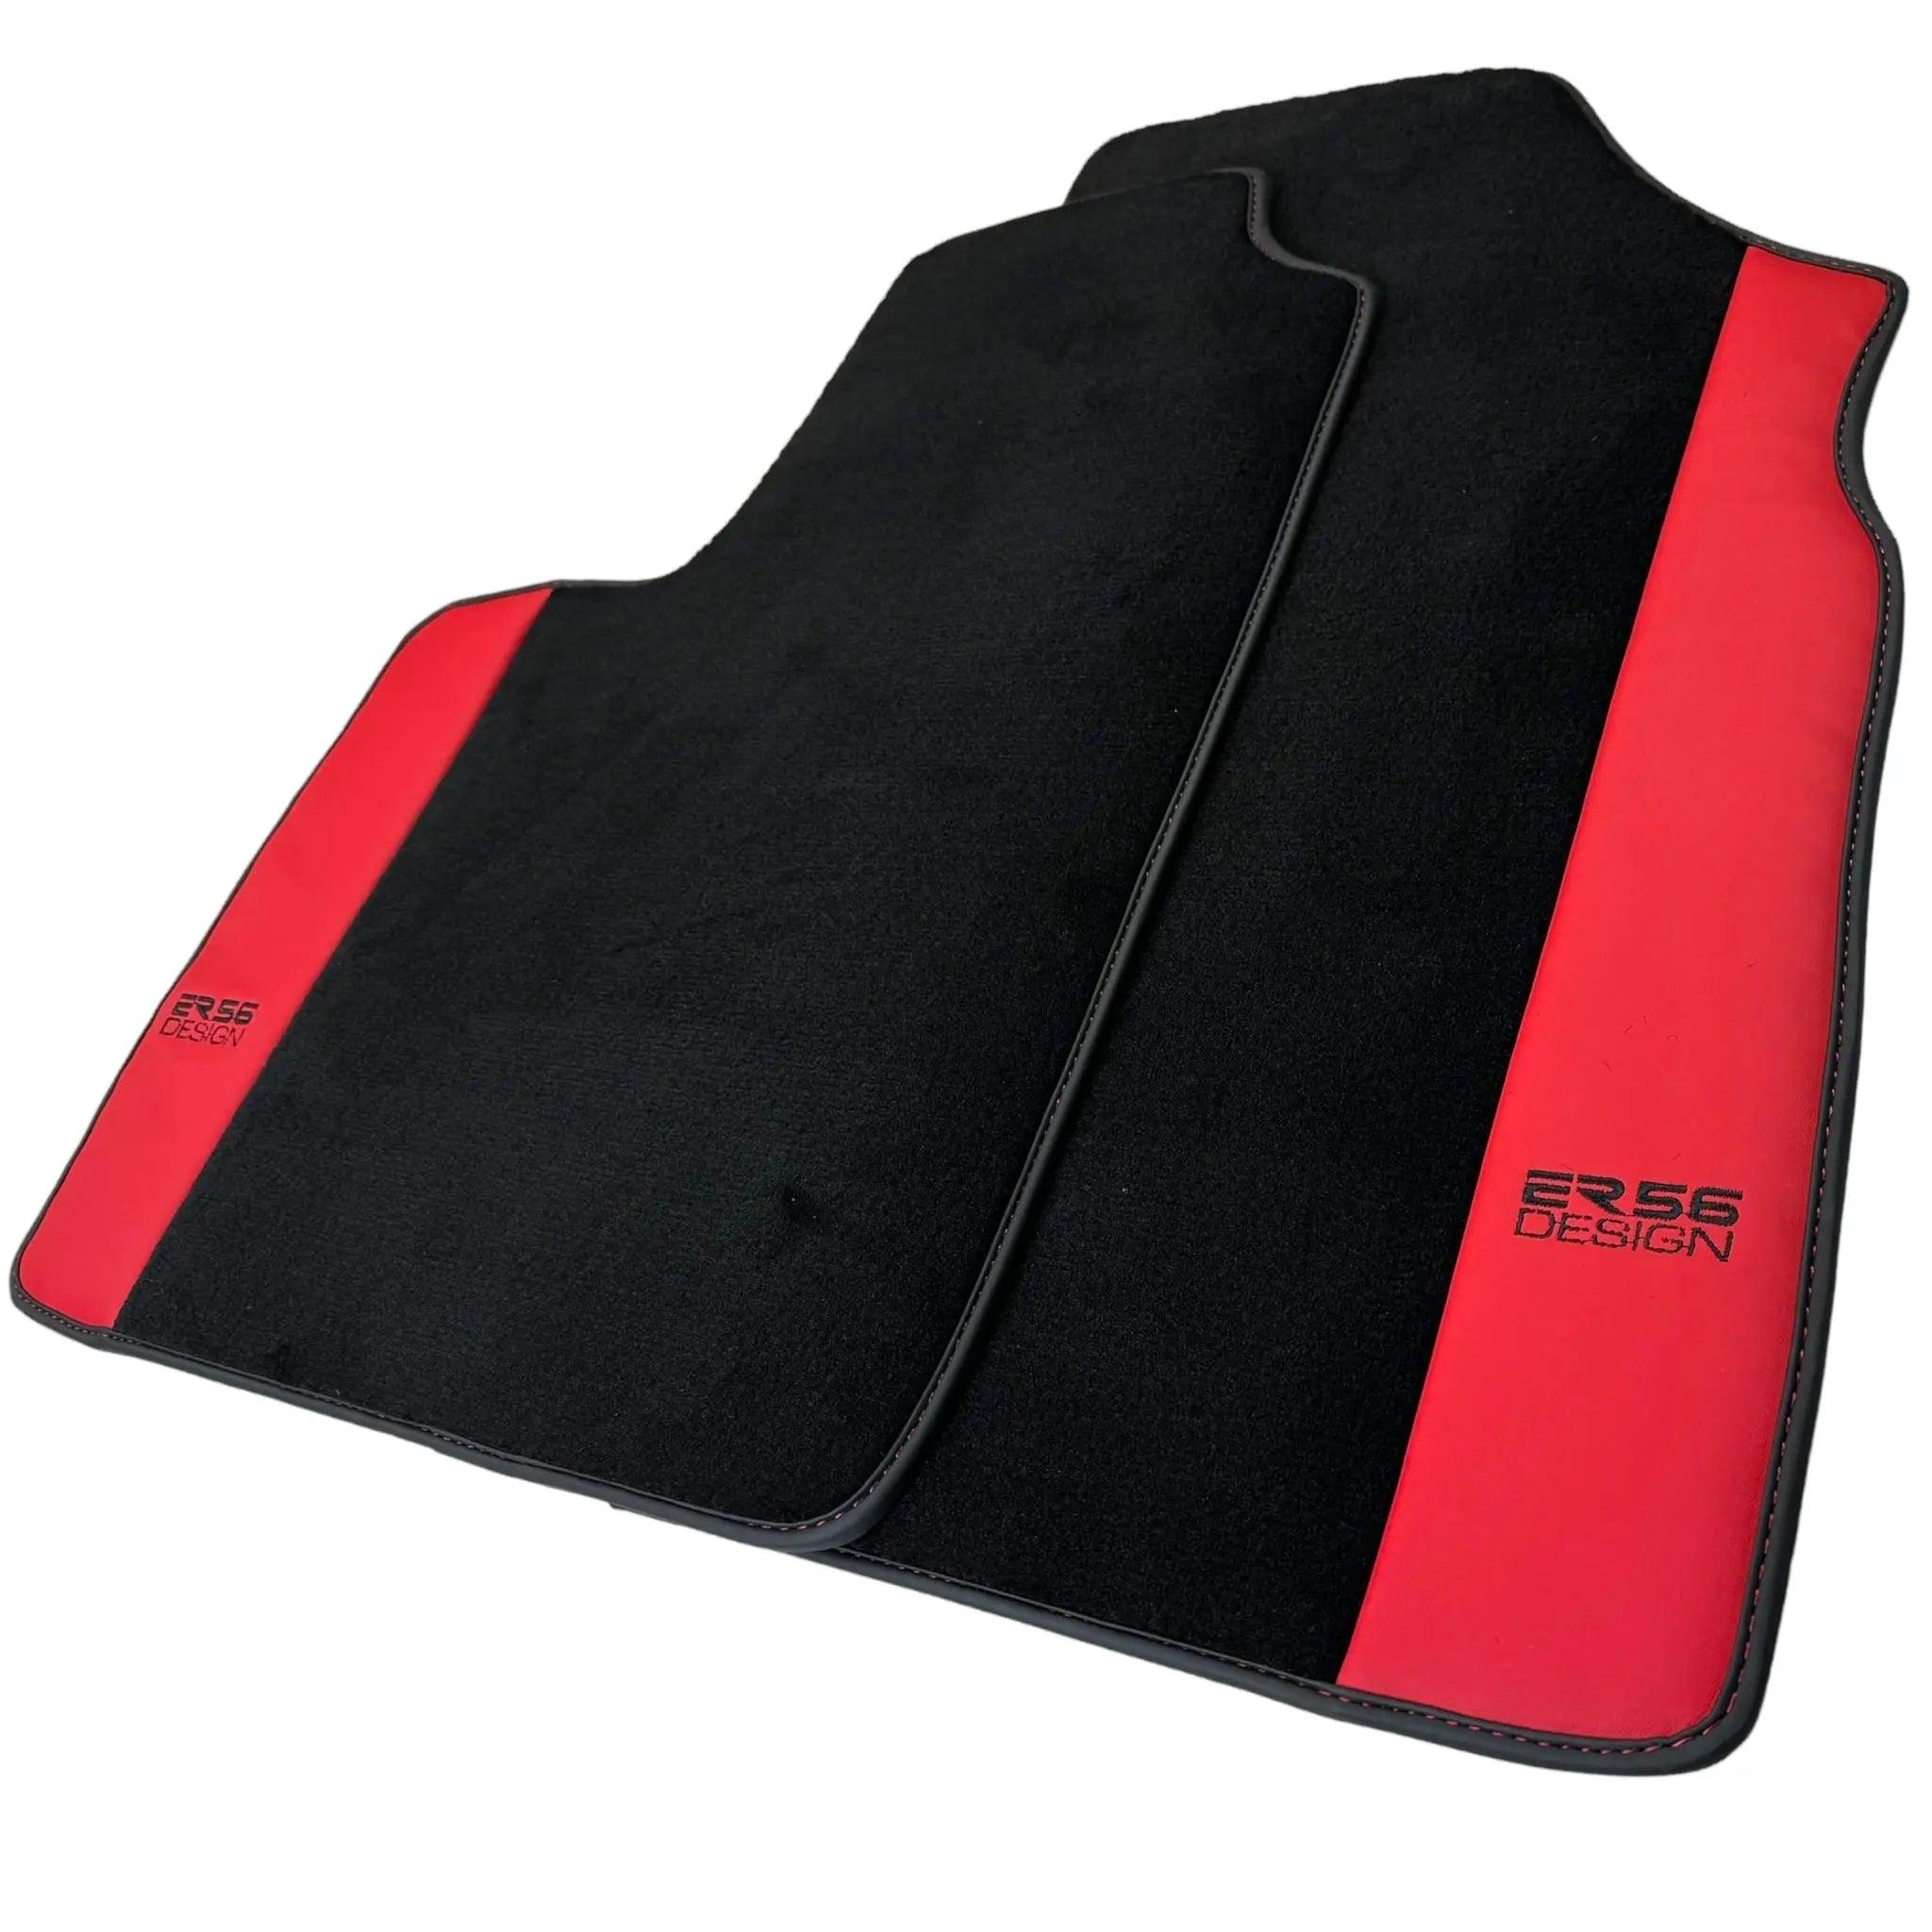 Black Floor Mats for Bentley Continental GT (2003–2011) with Red Leather | ER56 Design